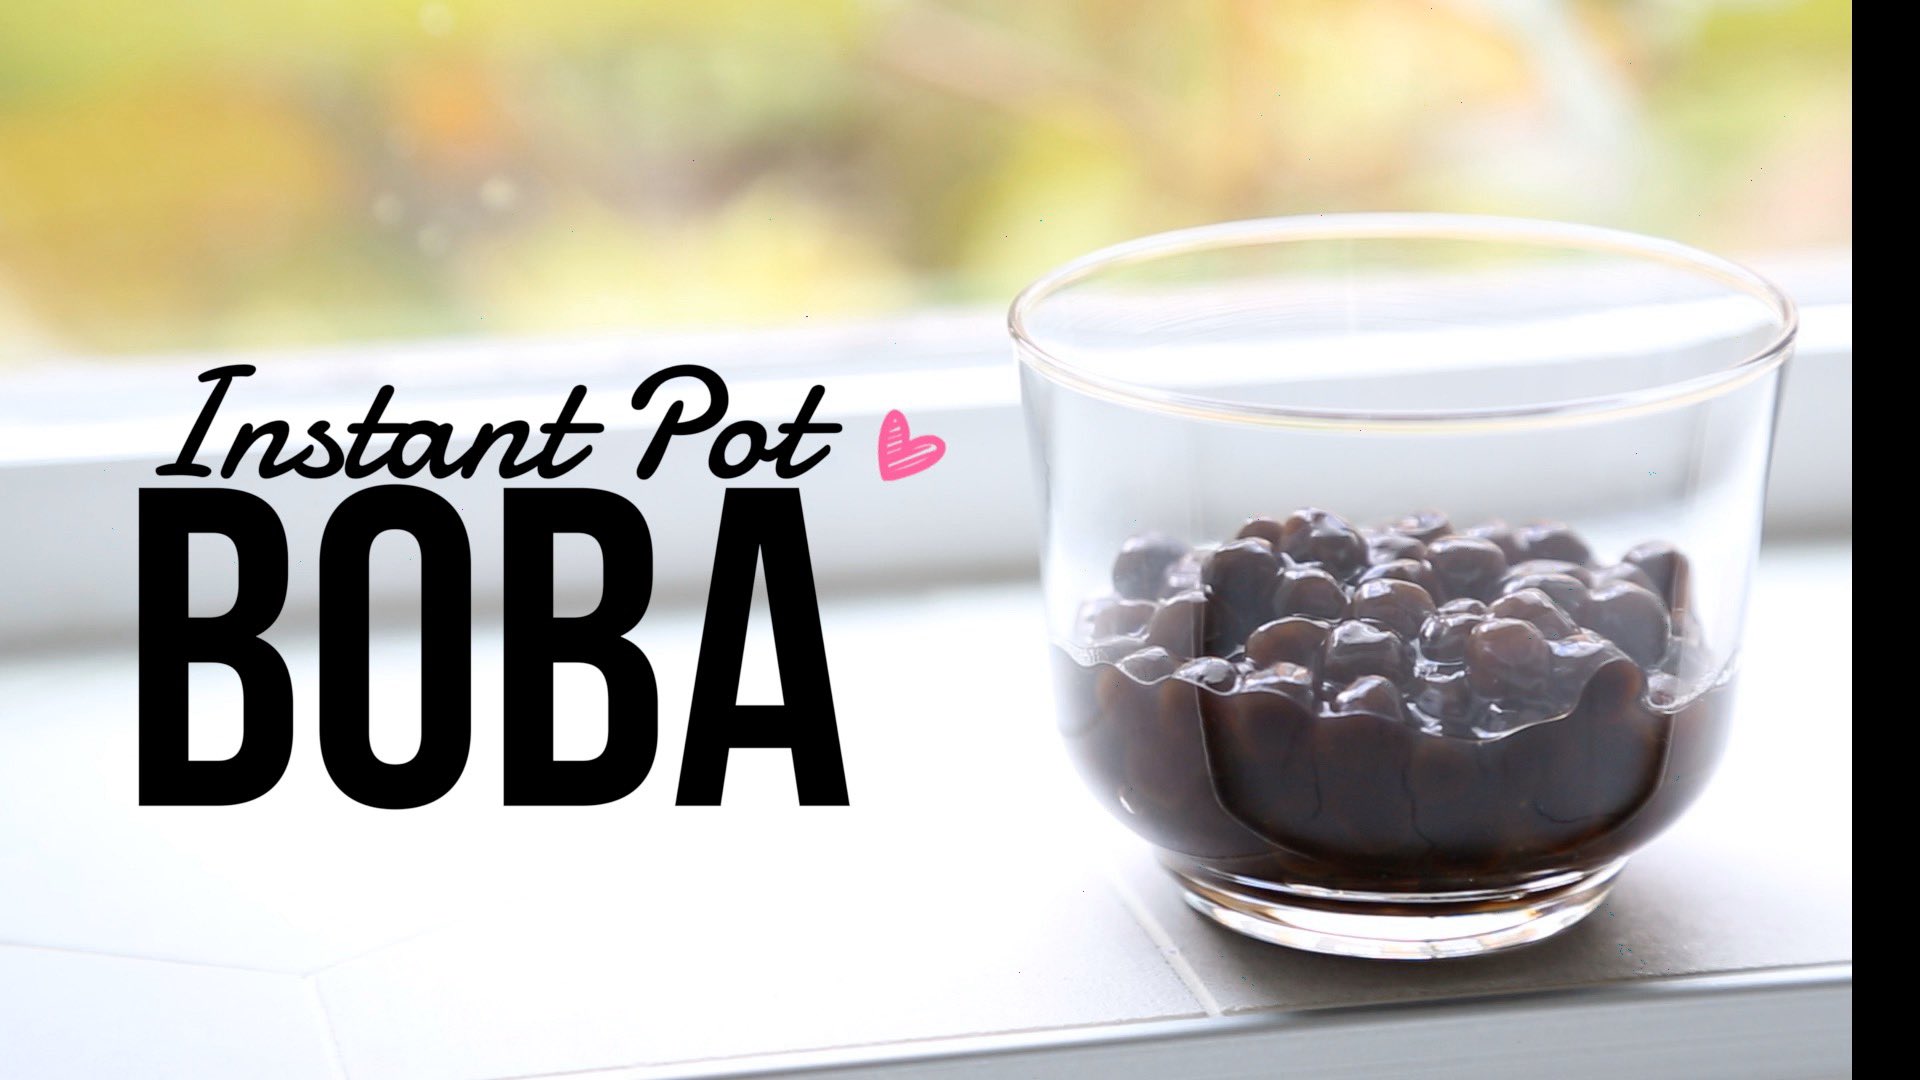 Angel Wongs Kitchen On Twitter This Is What Happens When Im Stuck At Home With Boba Cravings Make Tapioca Pearls In Your Instant Pot With My 15 Minute